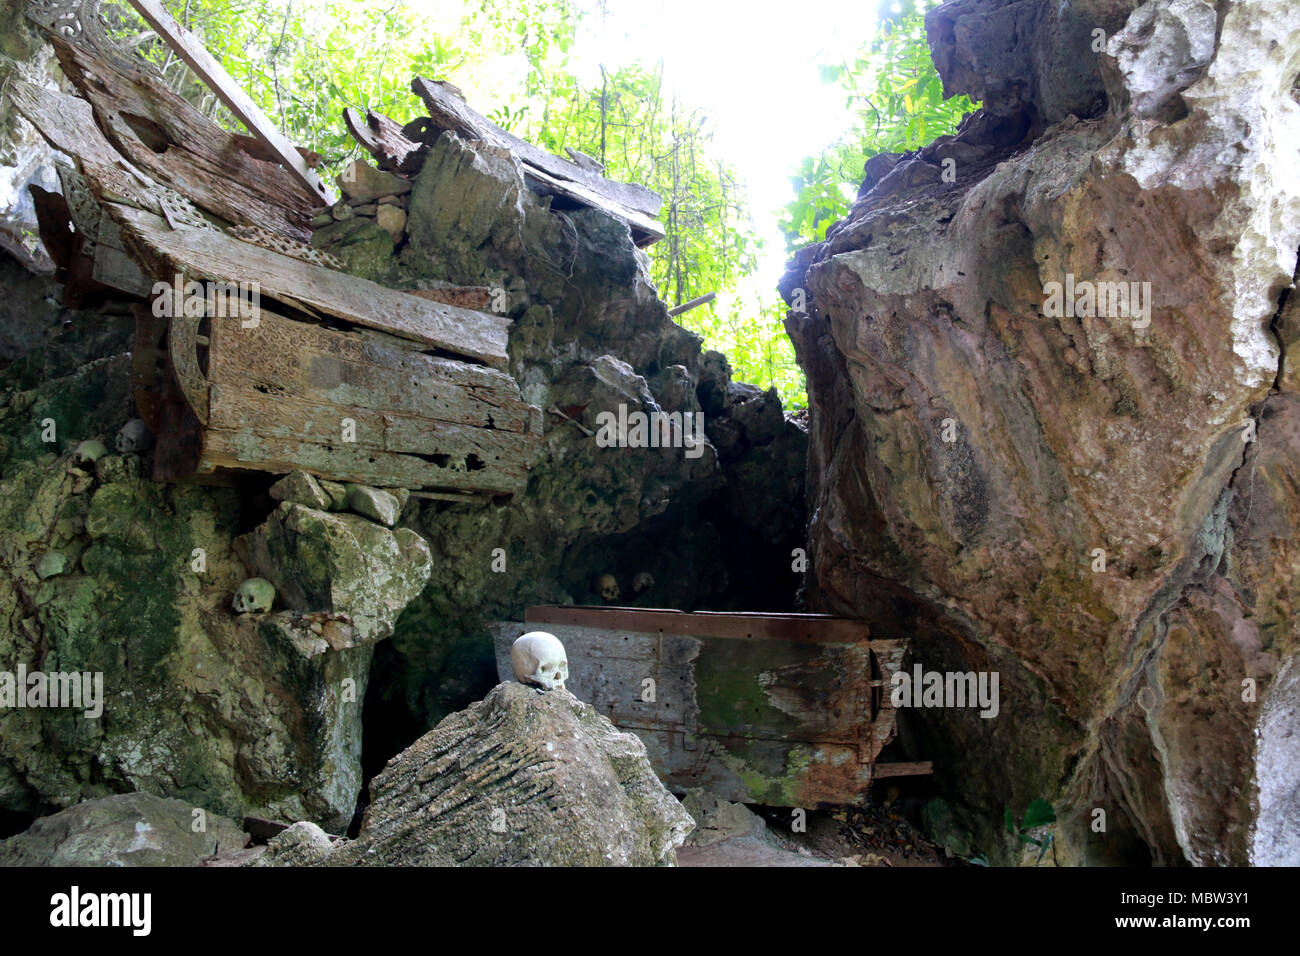 Rotten Coffins, Guardians of the Dead (Tau-Tau’s) and Human Skulls in the Tampang Allo Burial Cave, Sulawesi, Indonesia Stock Photo